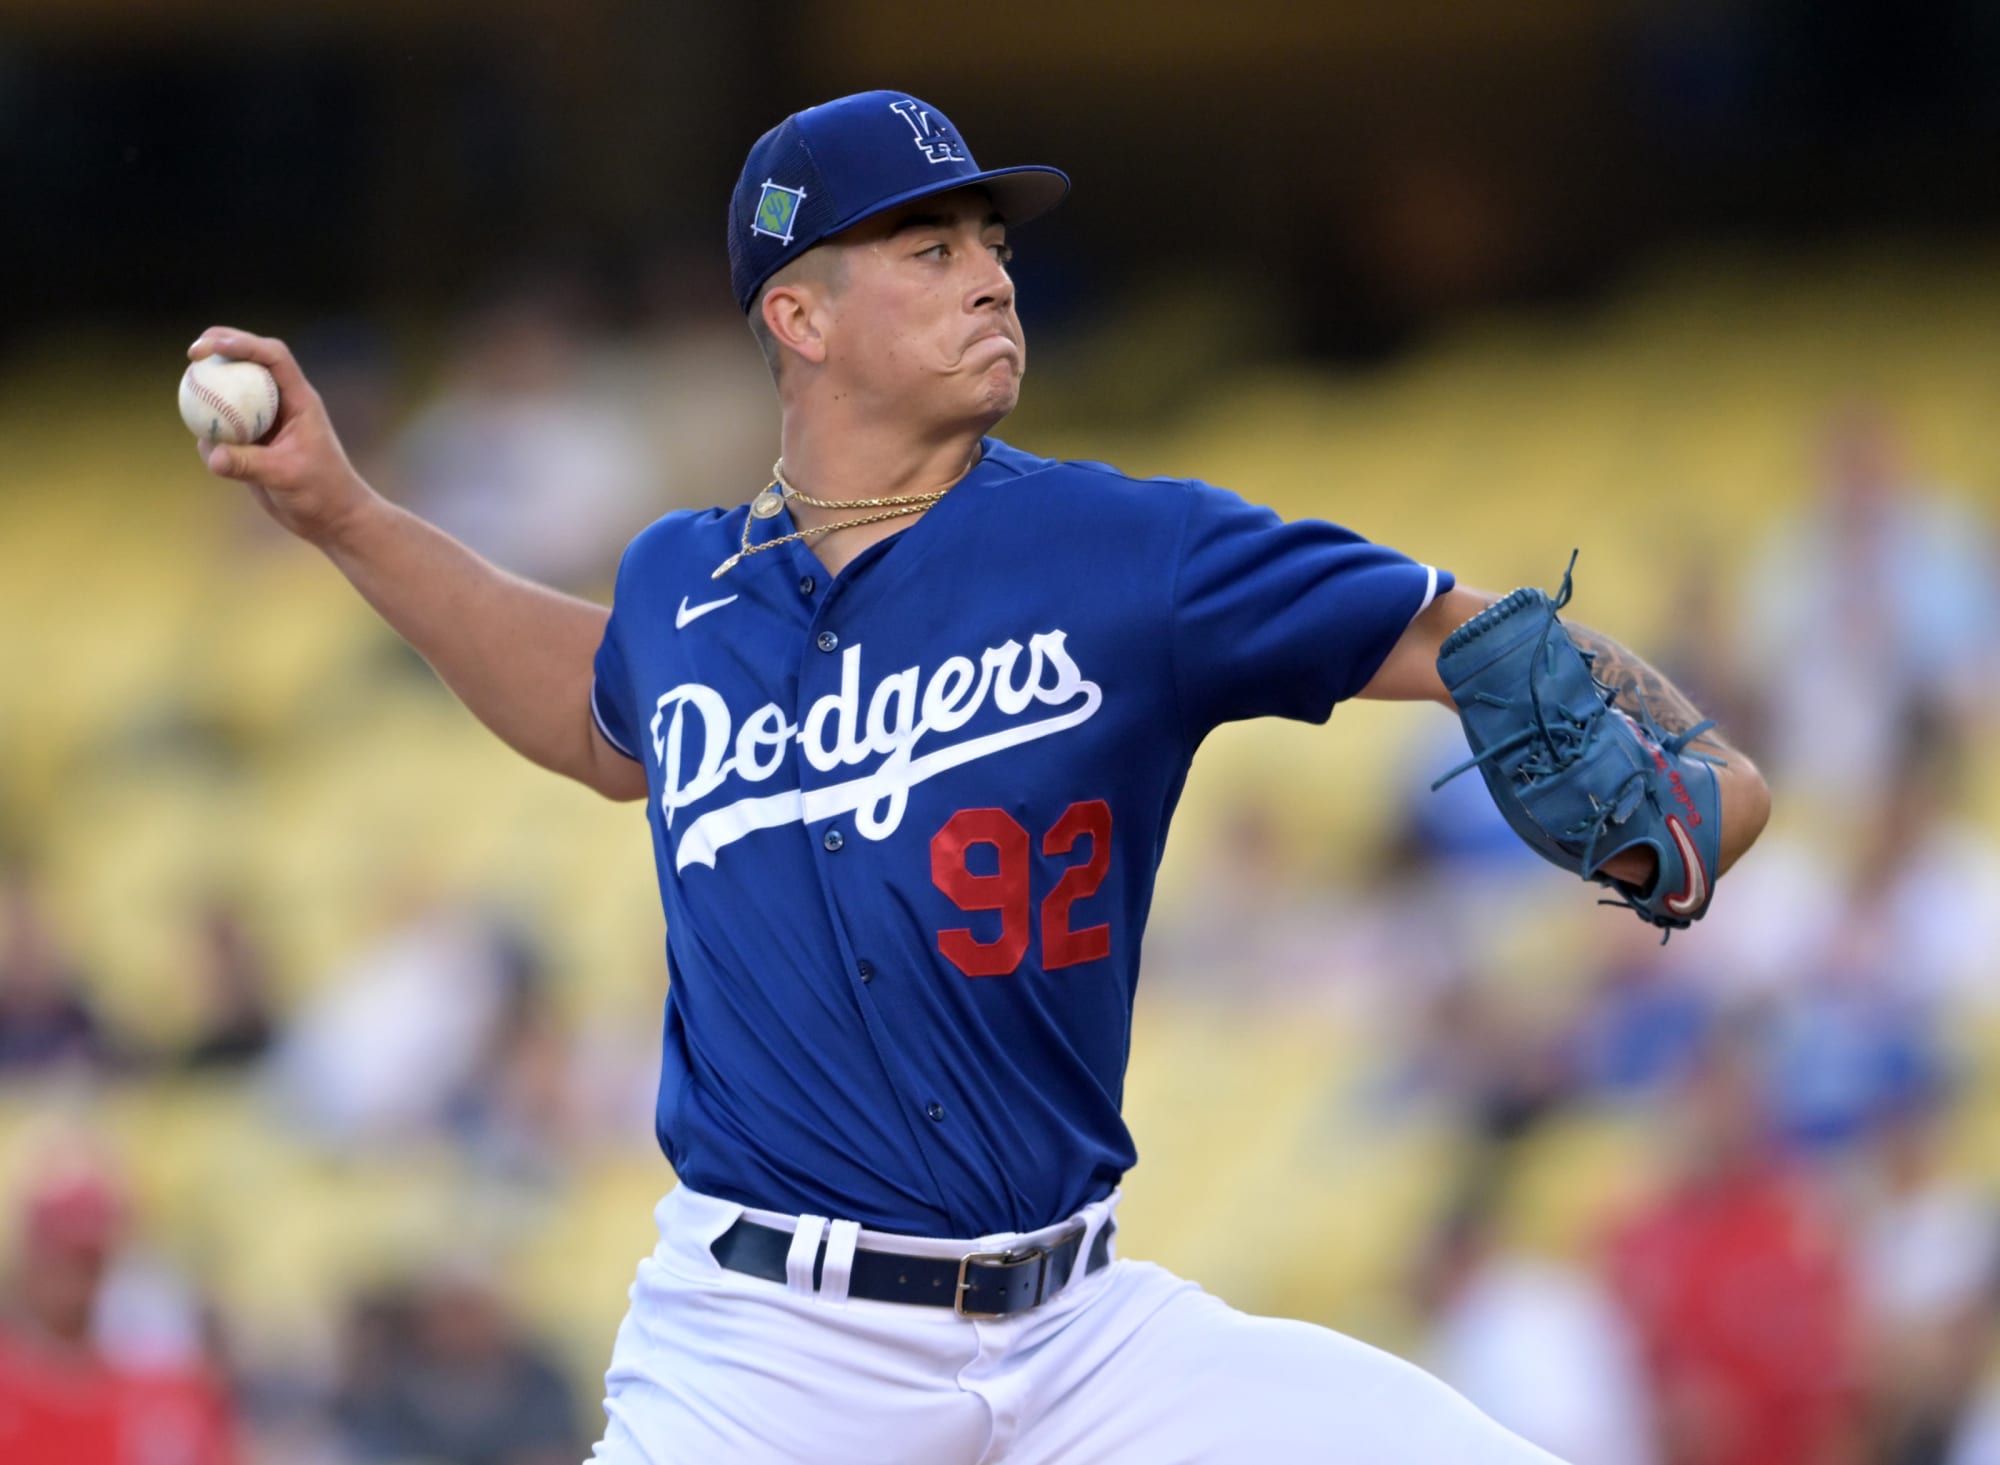 Bobby Miller needs an MLB callup when rosters expand for Dodgers